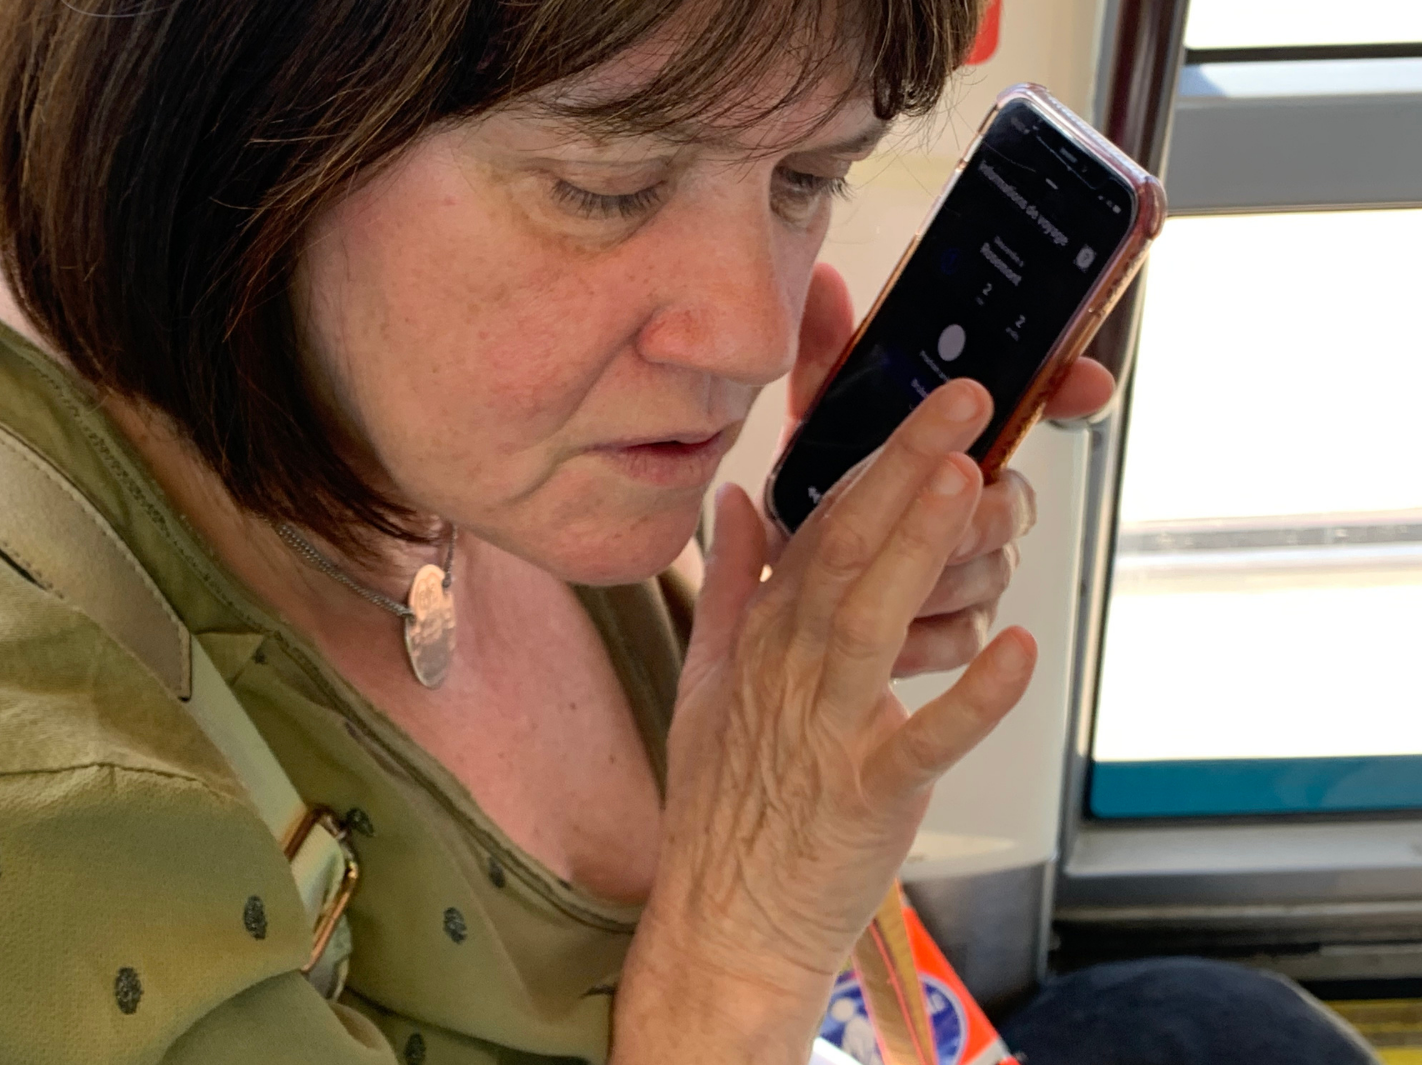 Visually impaired person using sound guidance on the Easymob application